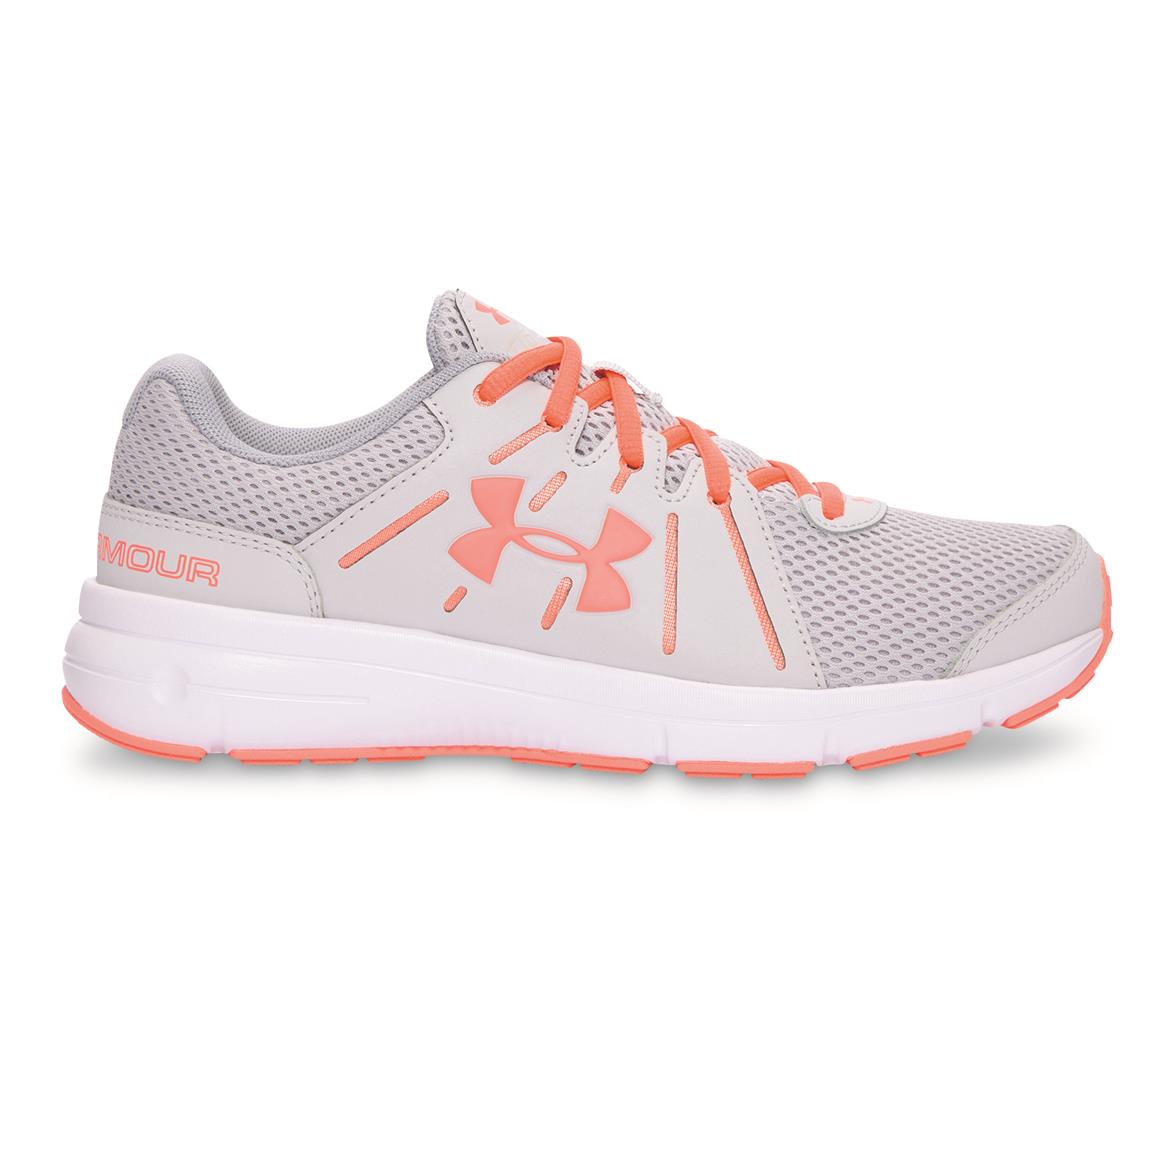 Cheap under armour ladies tennis shoes Buy Online OFF54% Discounted